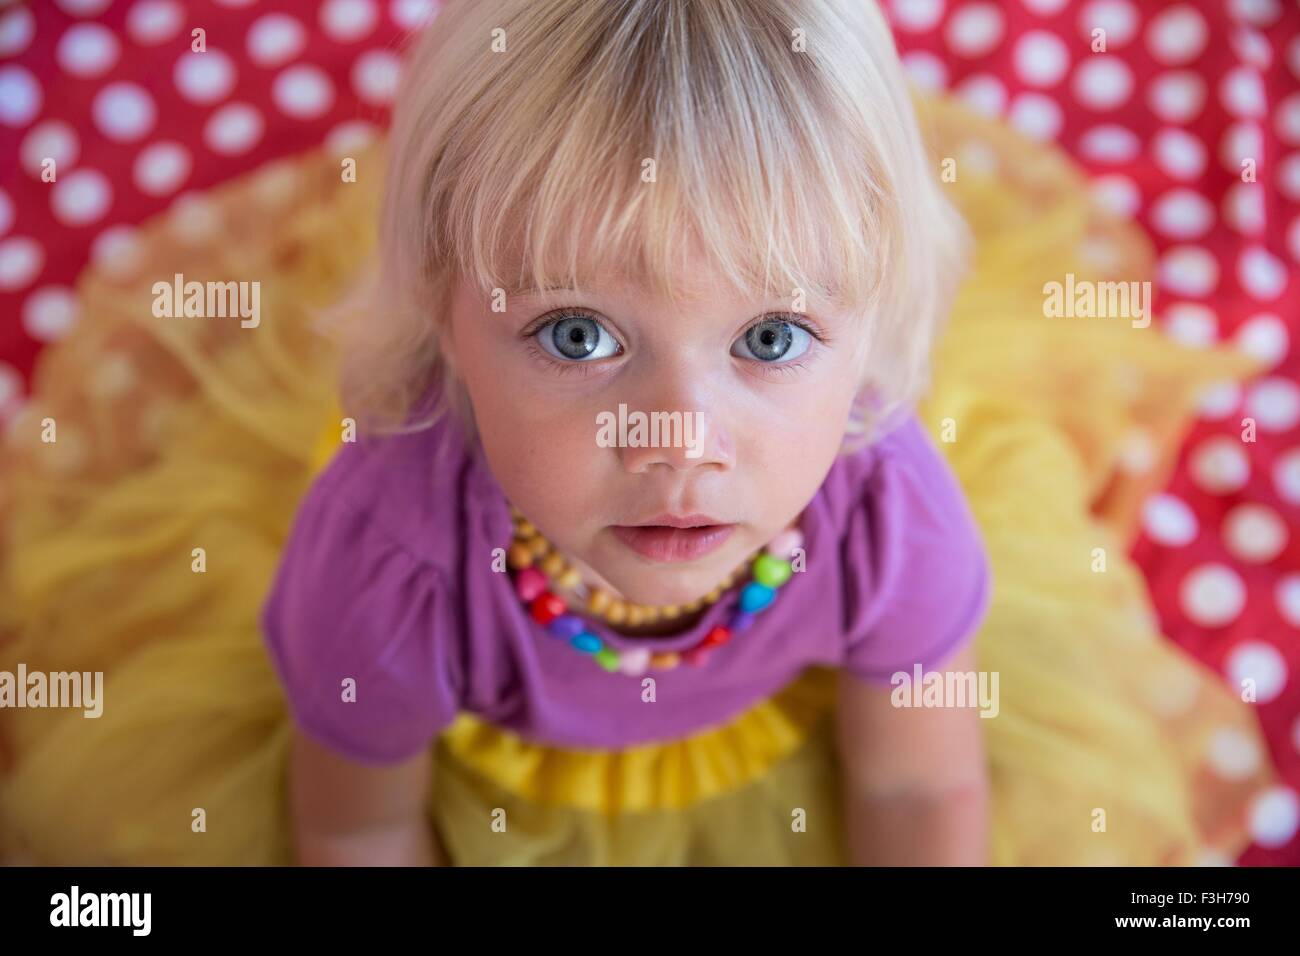 Overhead portrait of female toddler with blue eyes and blond hair Stock Photo